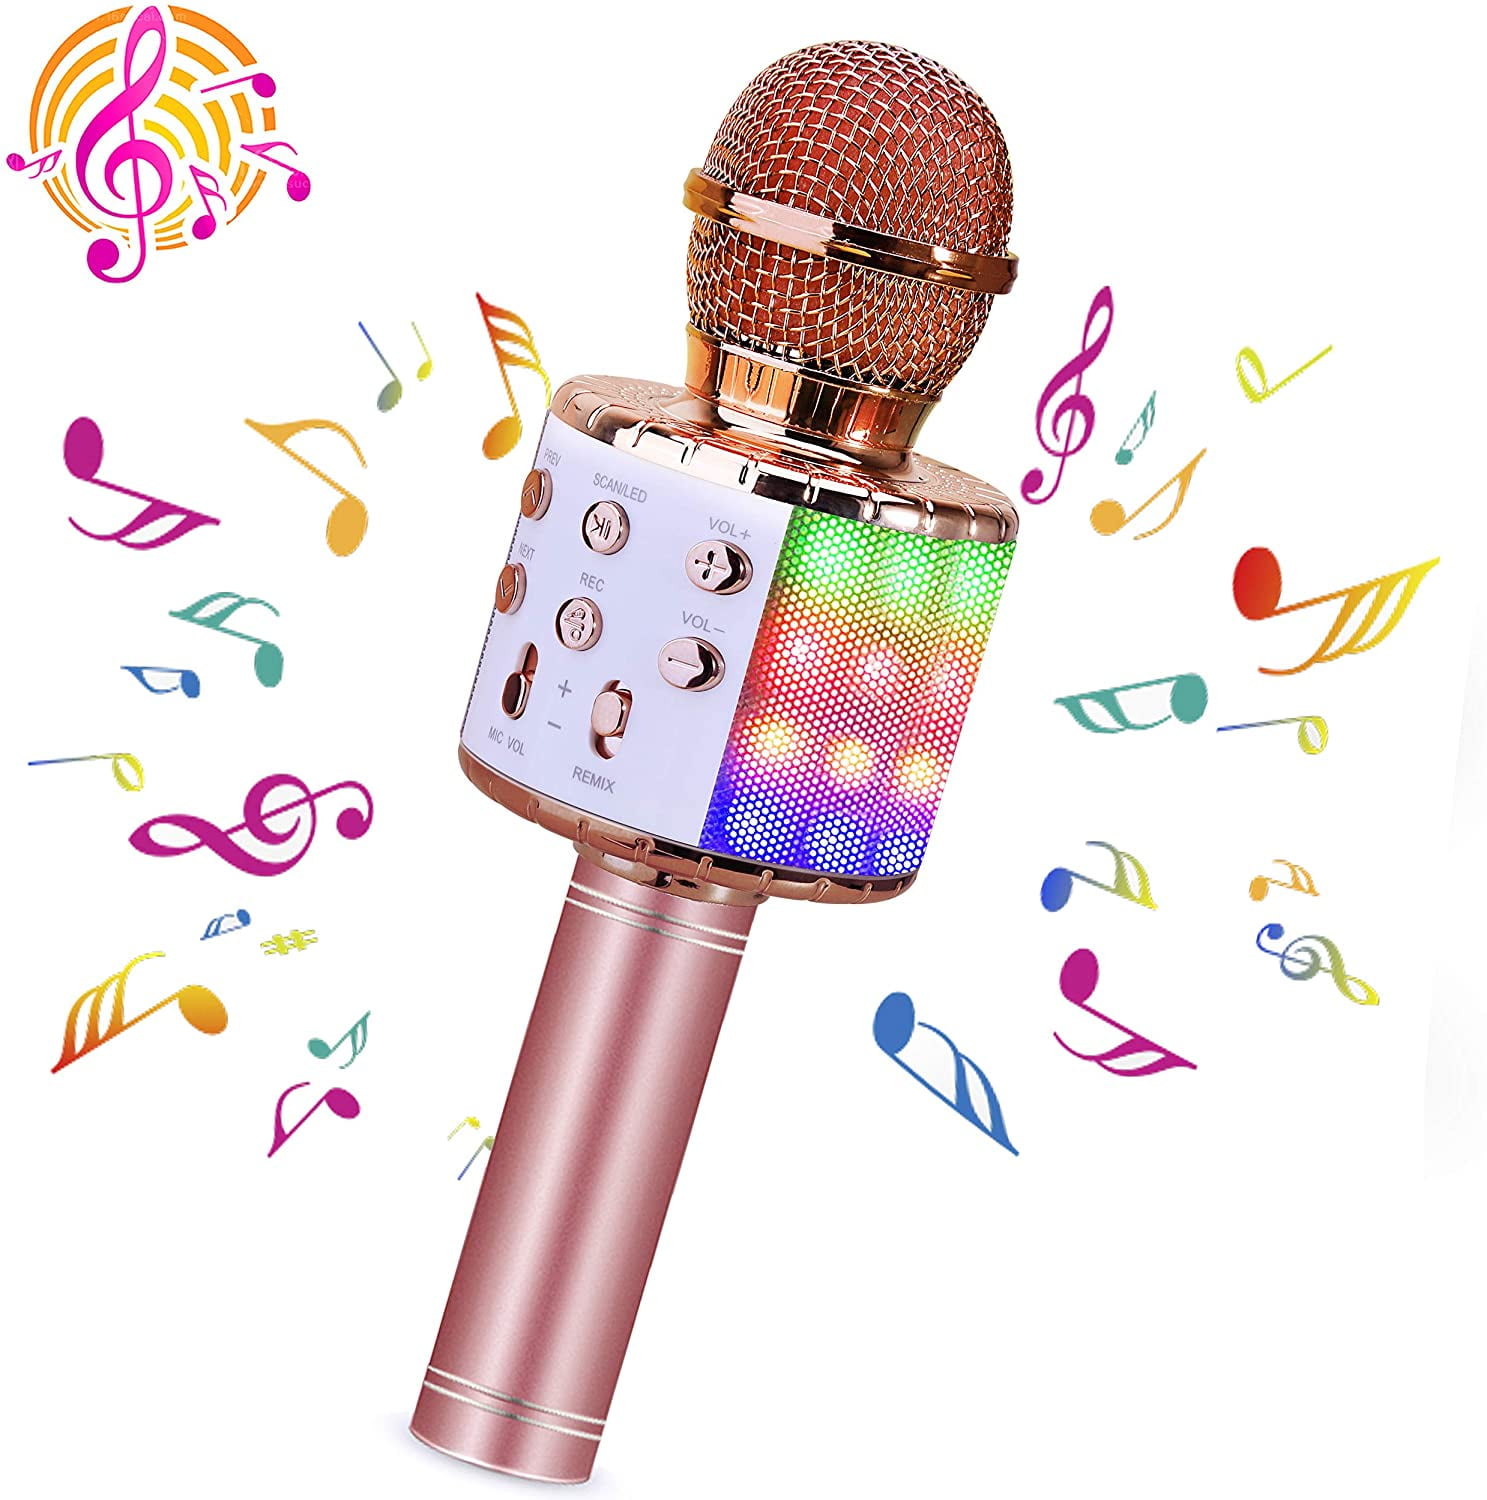 Portable Handheld Karaoke Speaker Machine Christmas Birthday Home Party for Android/iPhone/PC or All Smartphone BONAOK Wireless Bluetooth Karaoke Microphone with Controllable LED Lights Space Gray 